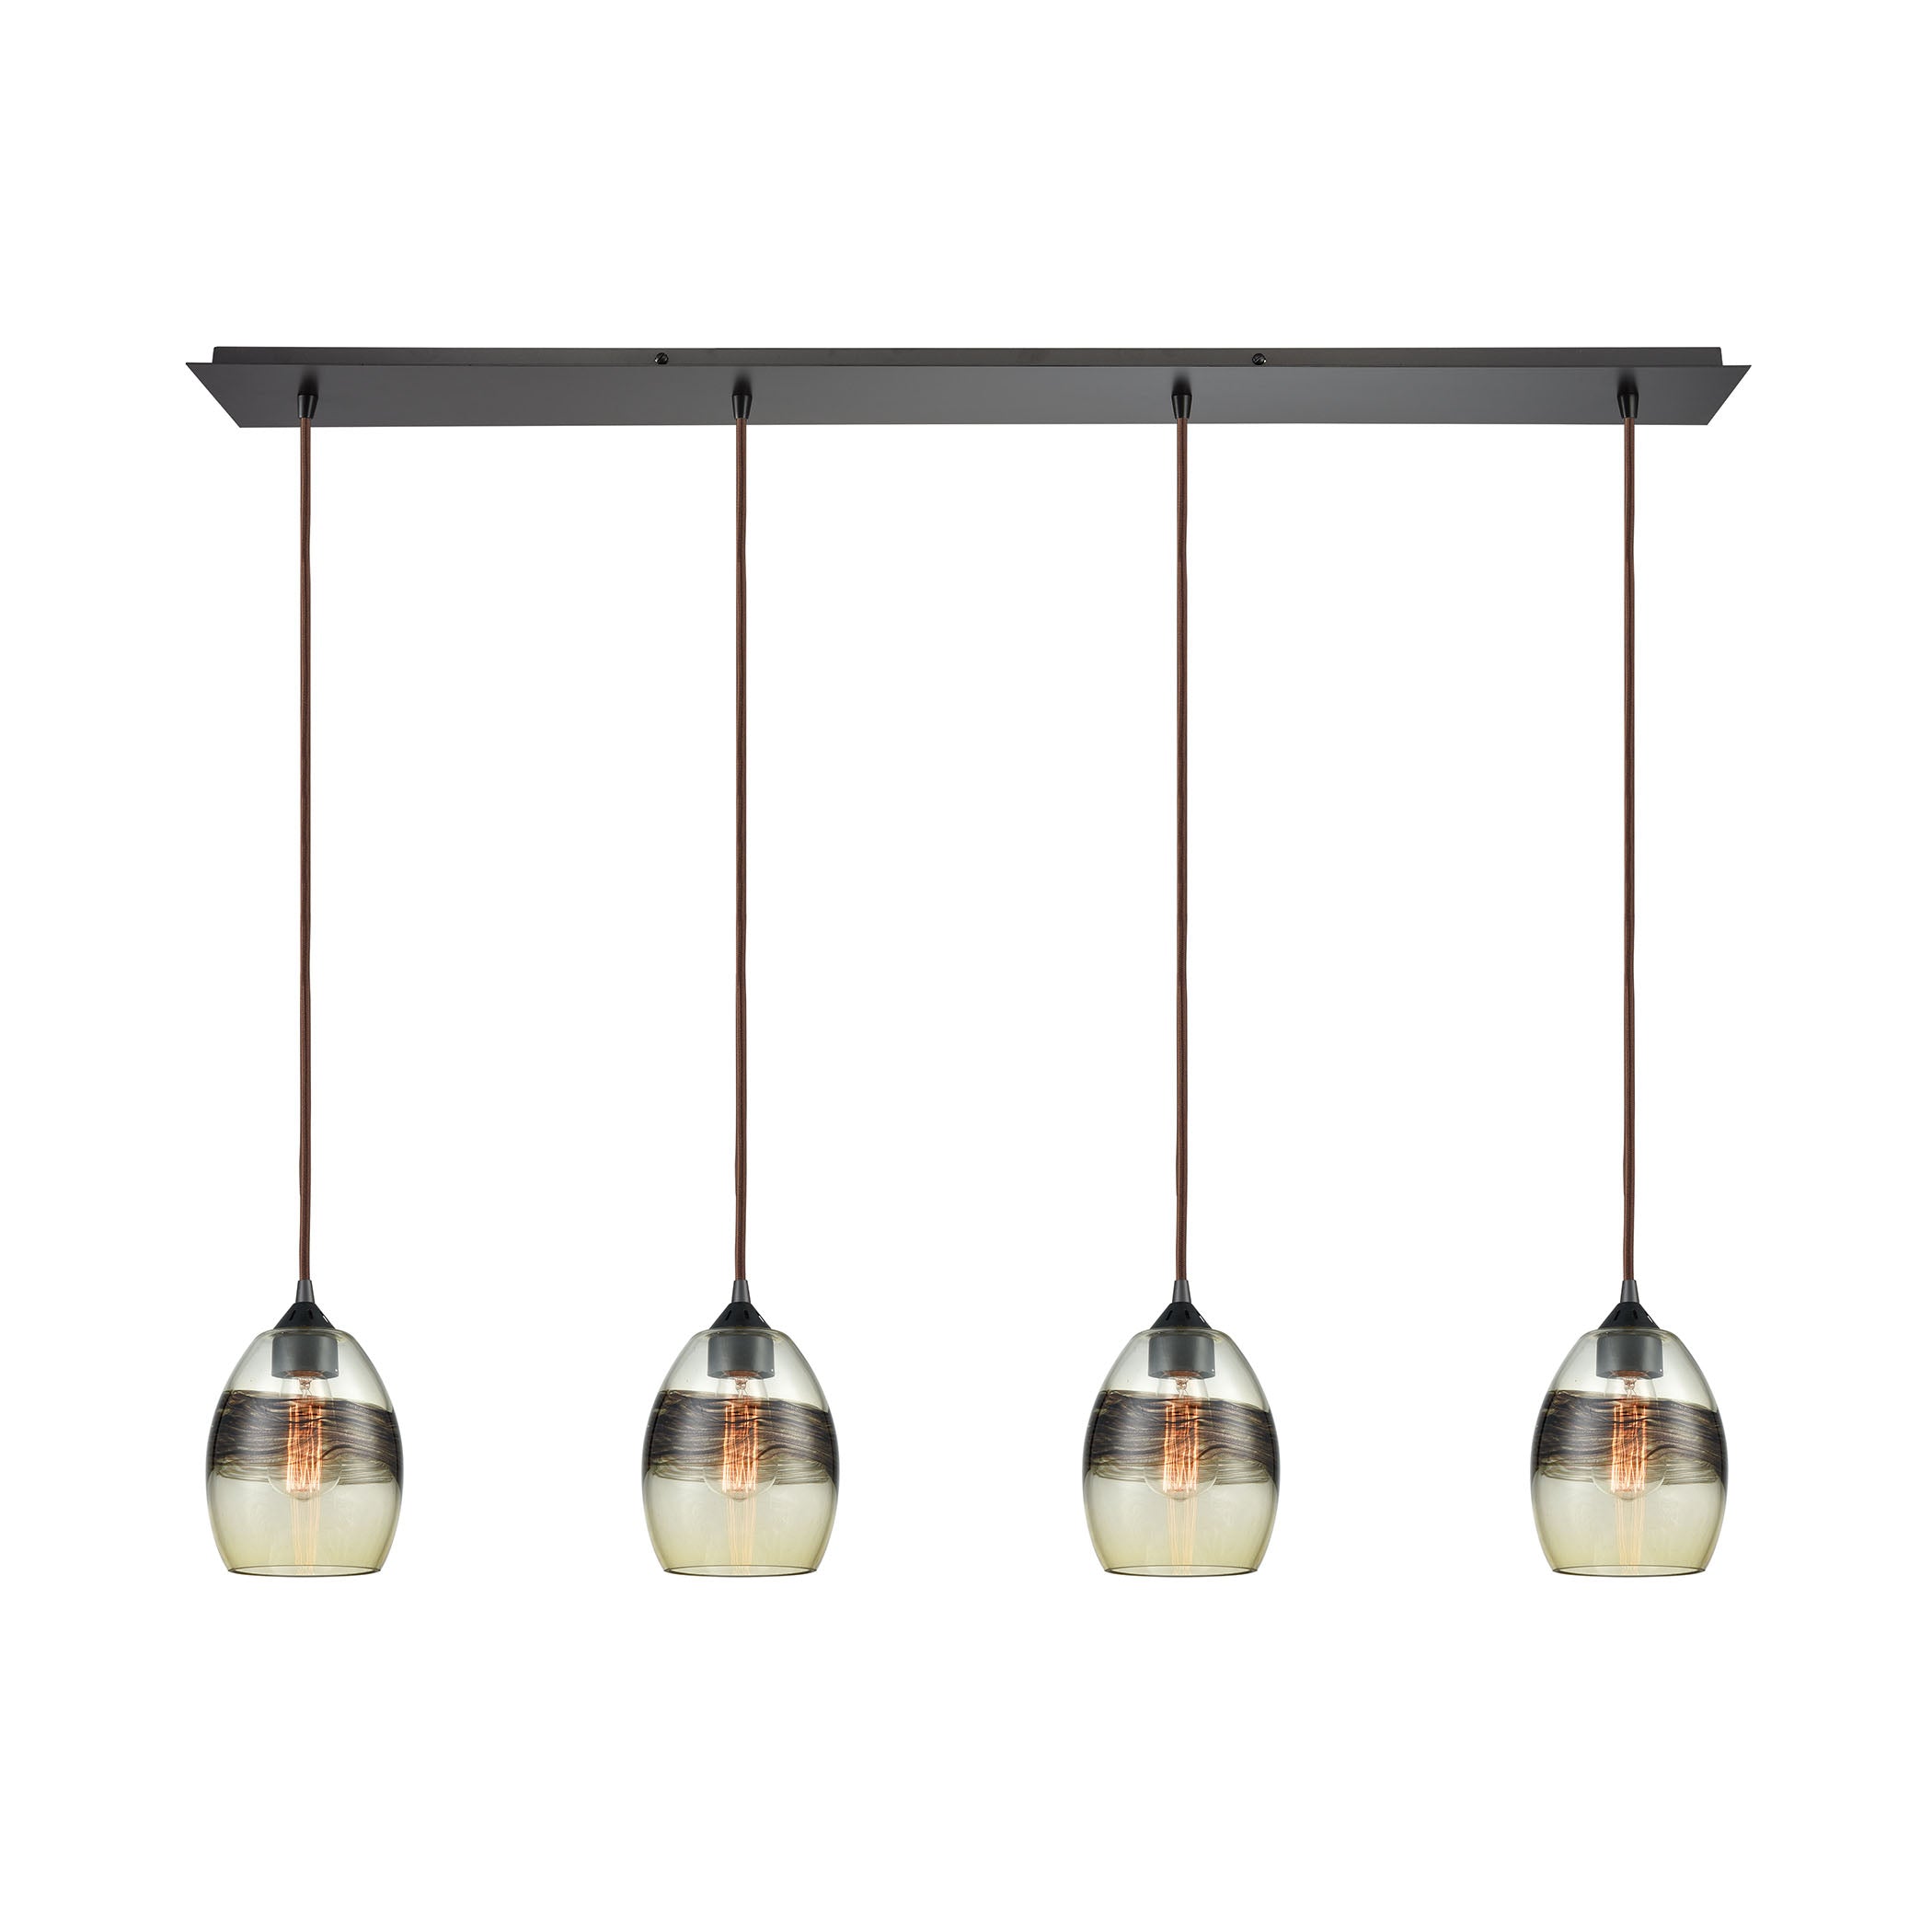 ELK Lighting 25122/4LP Whisp 4-Light Linear Pendant Fixture in Oil Rubbed Bronze with Champagne-plated Glass